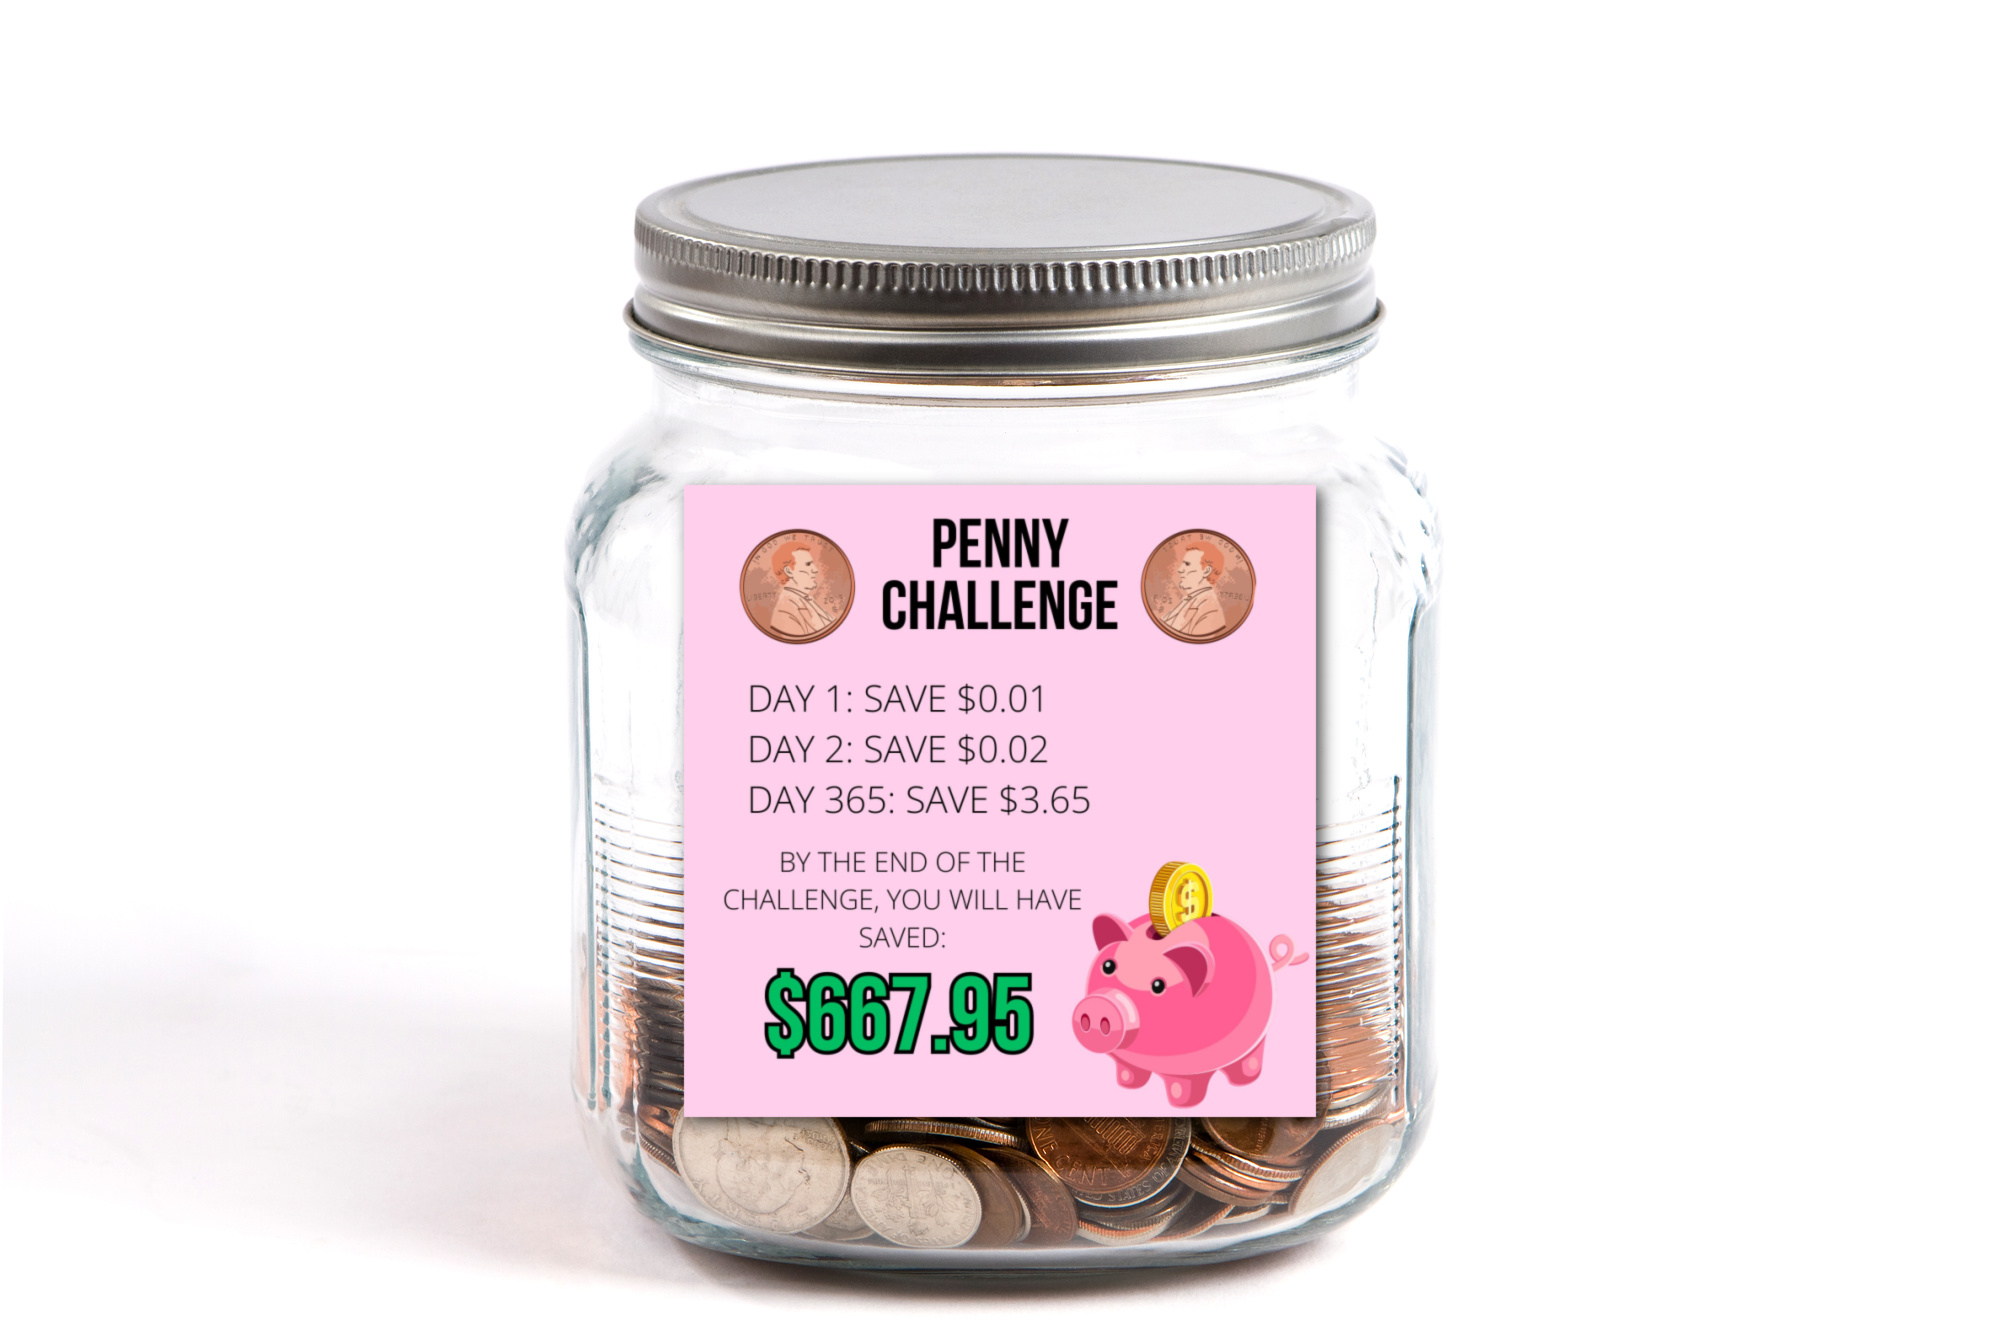 penny challenge jar with printable label on front